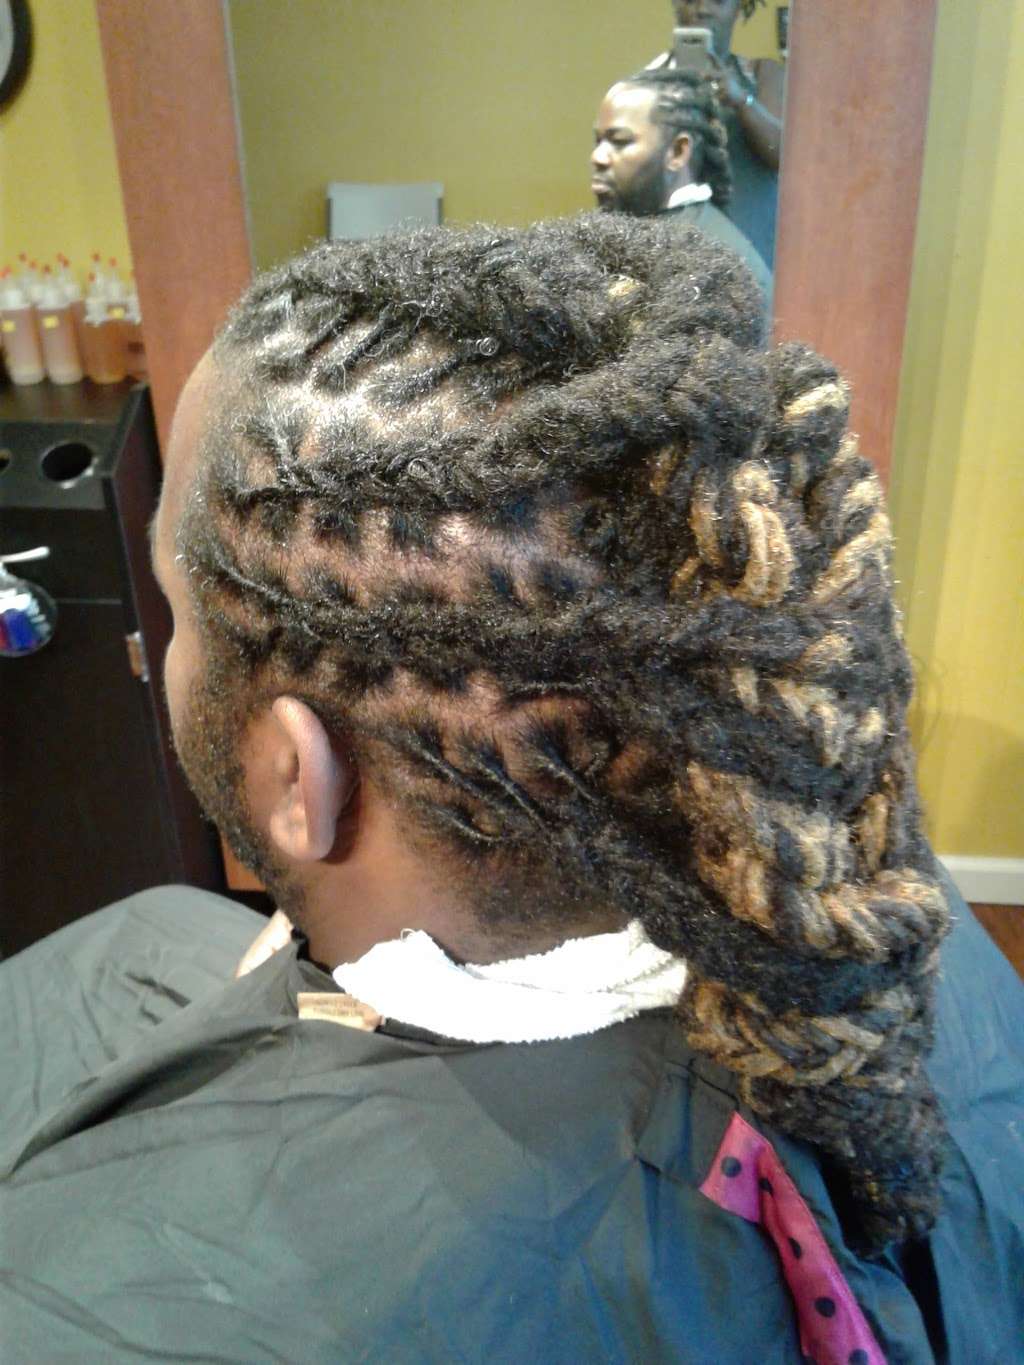 Infinity Hair Salon | 4550 Allisonville Rd, Indianapolis, IN 46205 | Phone: (317) 545-4550